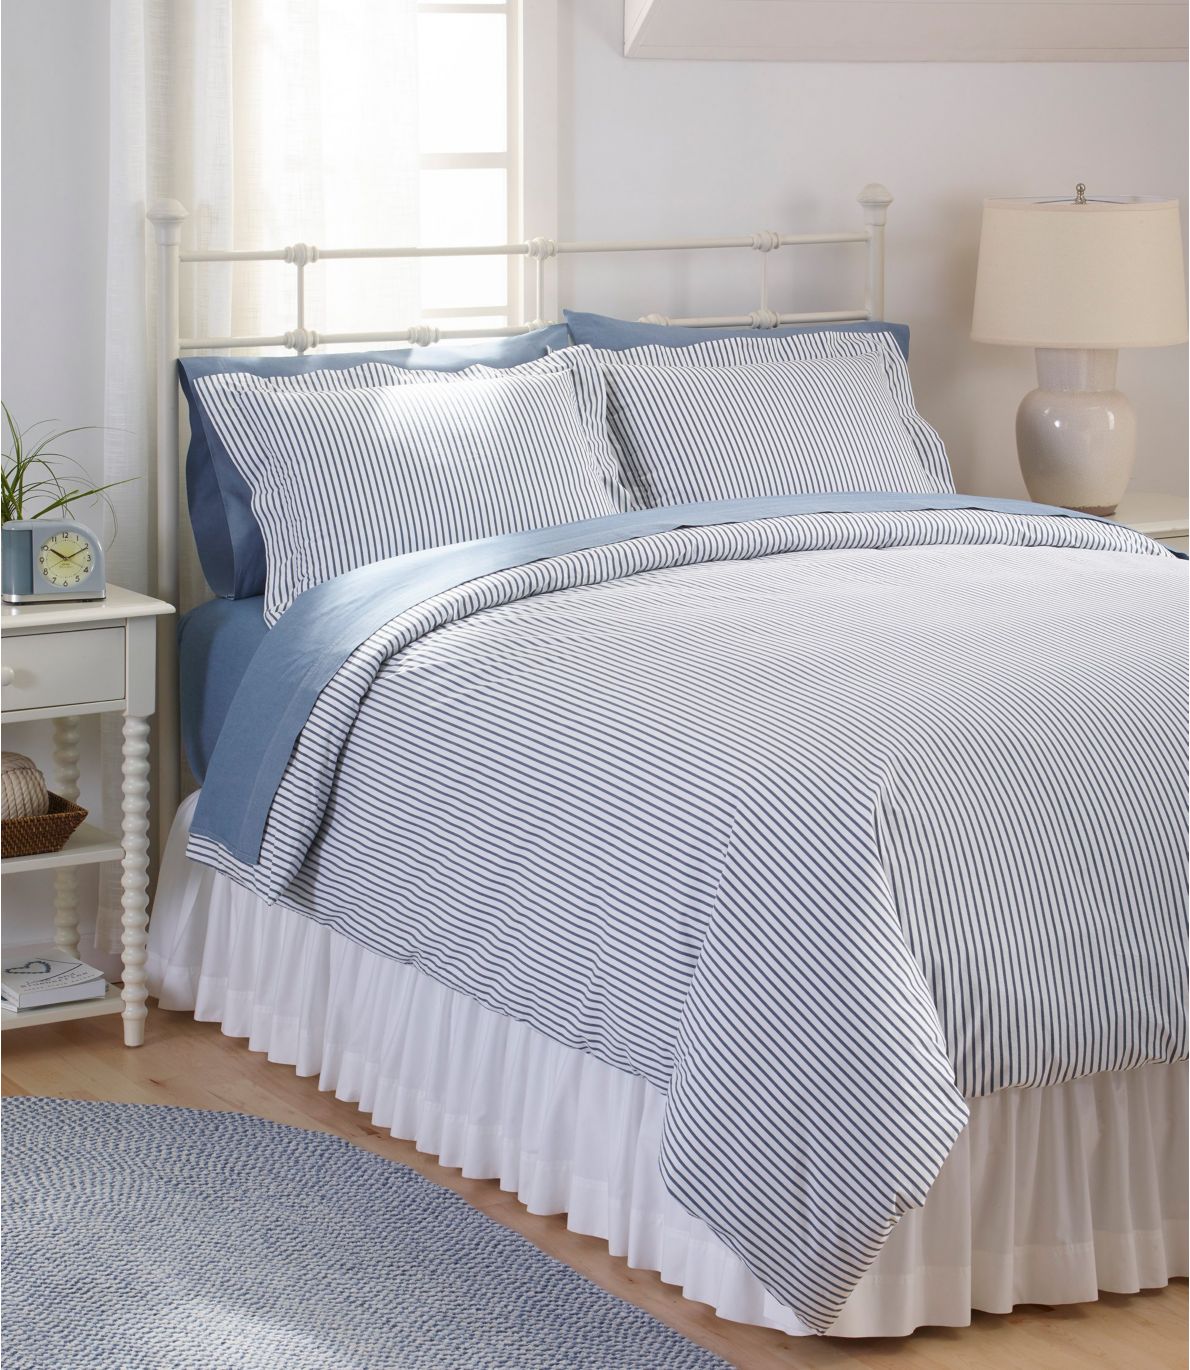 Percale Comforter Cover Collection, Stripe